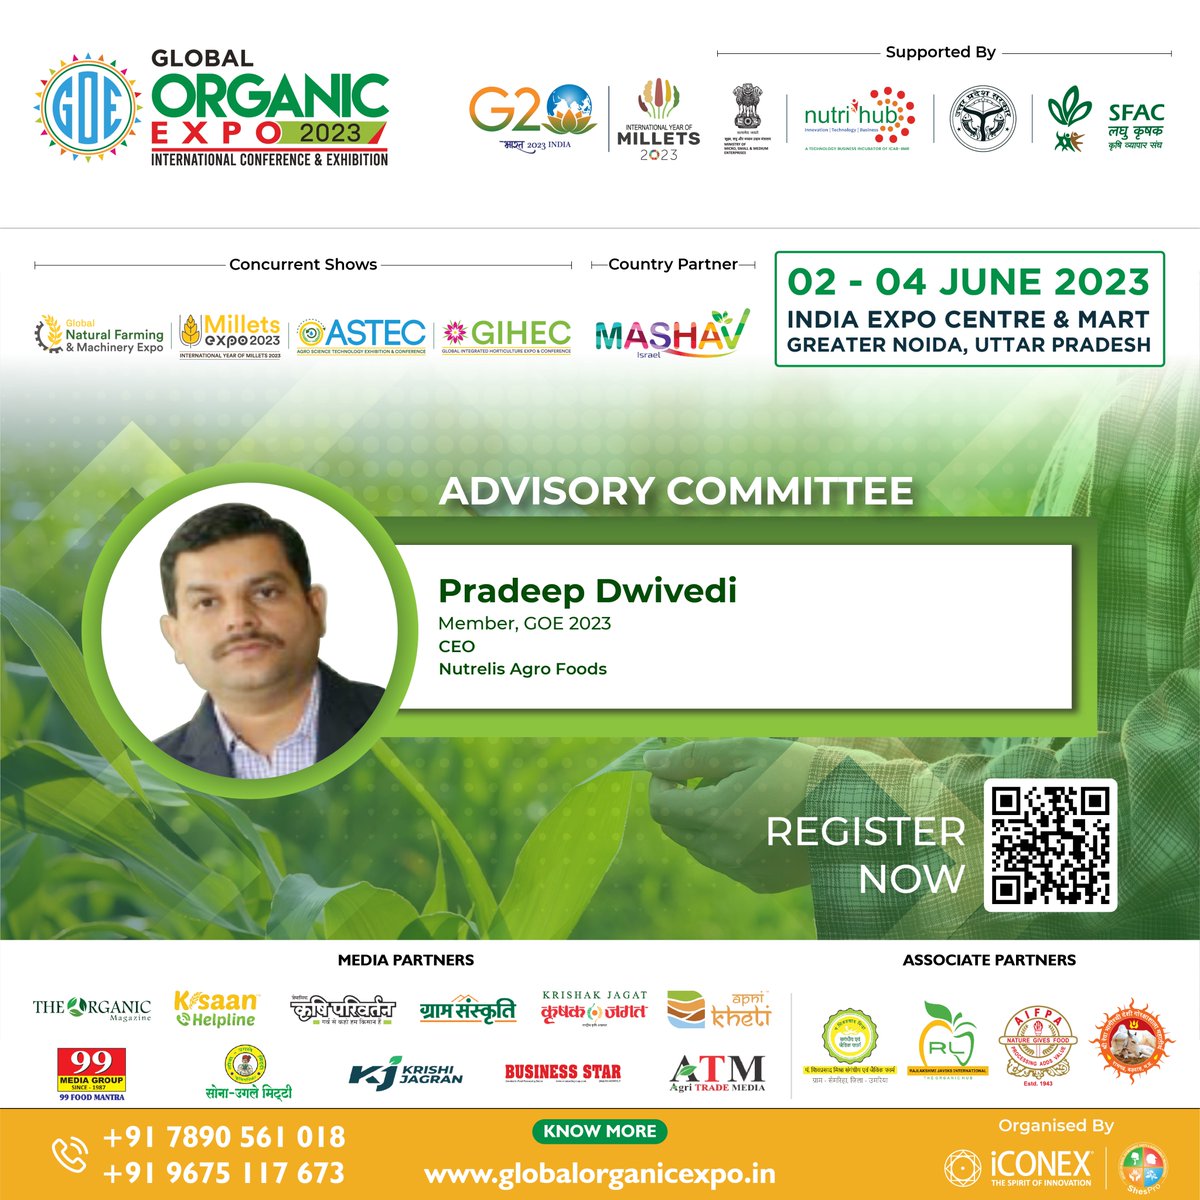 Global Organic Expo 2023 Welcomes Pradeep Dwivedi, CEO at Nutrelis Agro foods as a Advisory Committee Member of #GOE2023

Get More Information at globalorganicexpo.in 

#organic #organicfarming #AdvisoryCommittee #Millets #naturalfarming